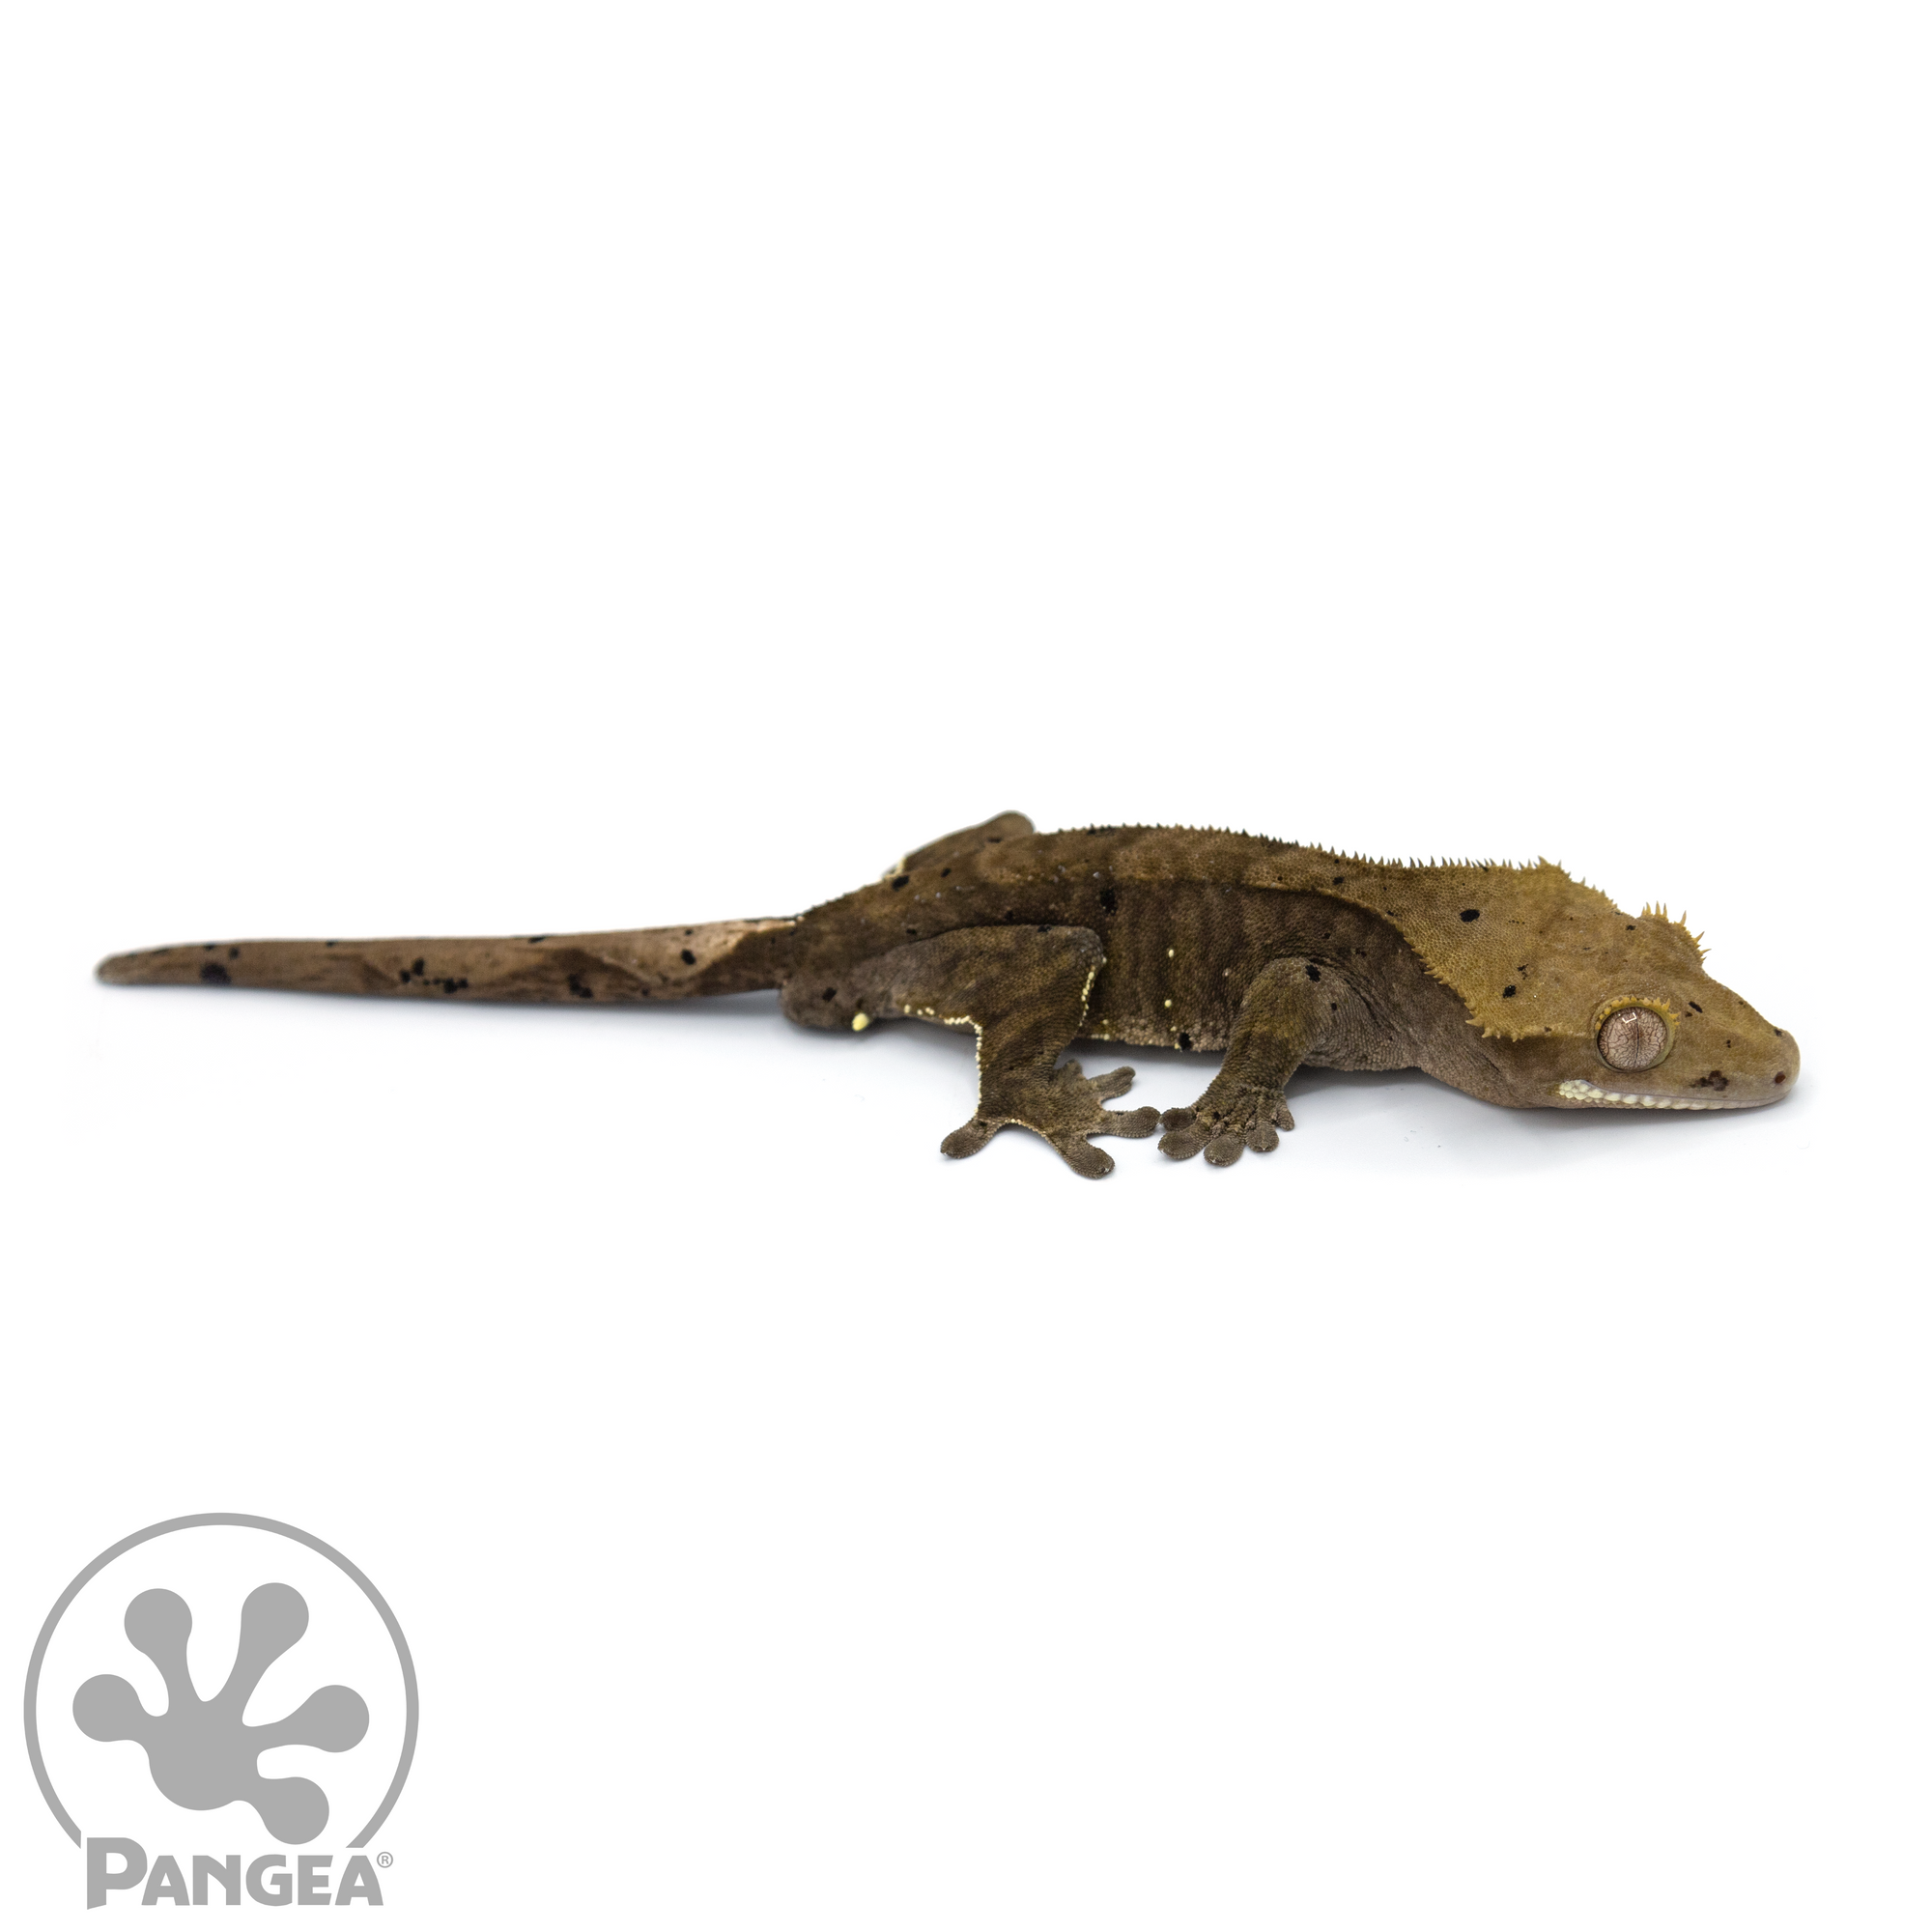 Male Charcoal Dalmatian Crested Gecko Cr-1049 looking right